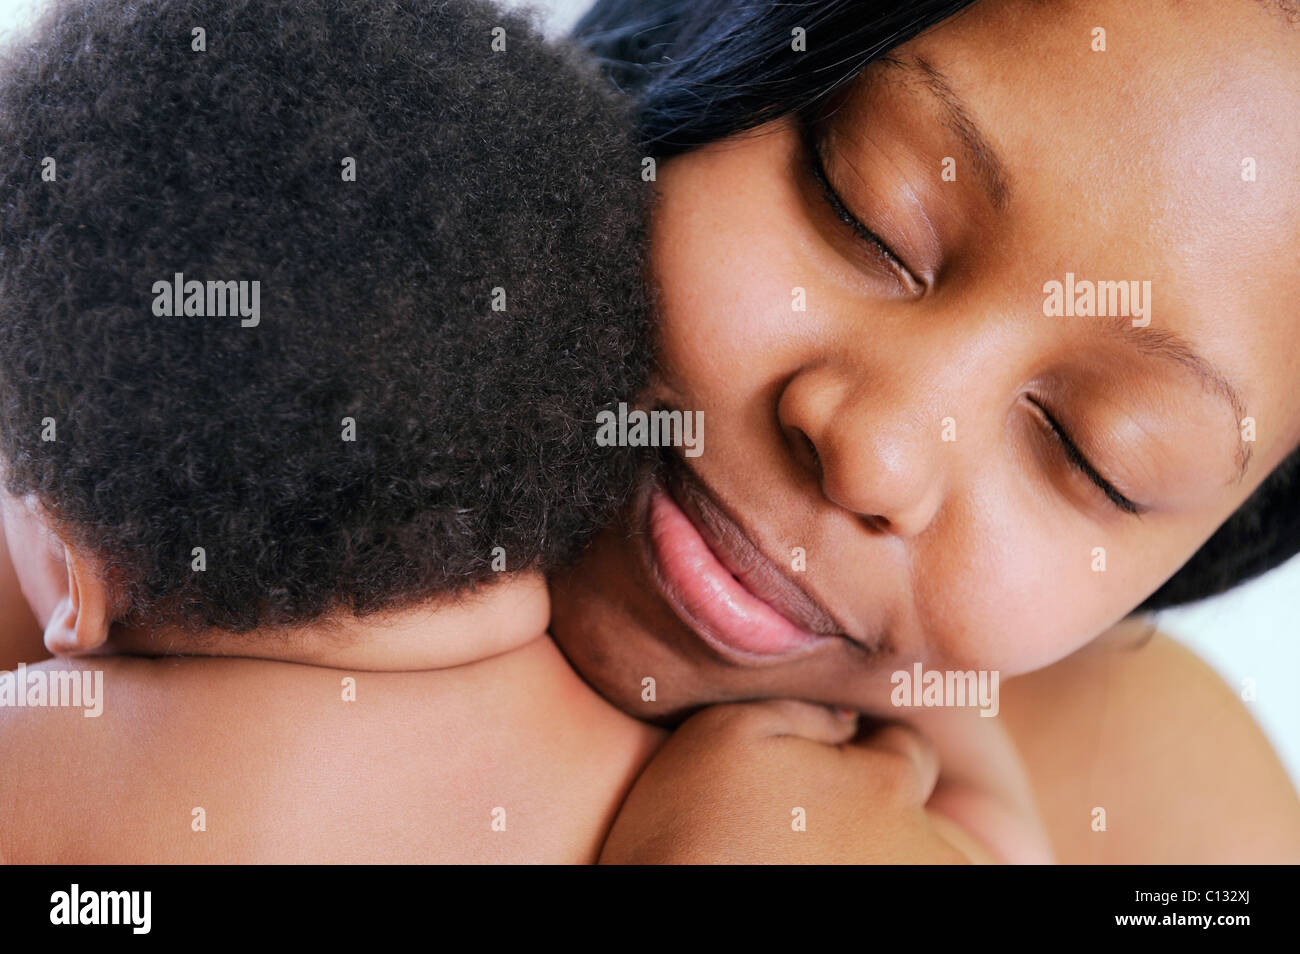 Close up of mother hugging her baby, Cape Town, South Africa. Stock Photo